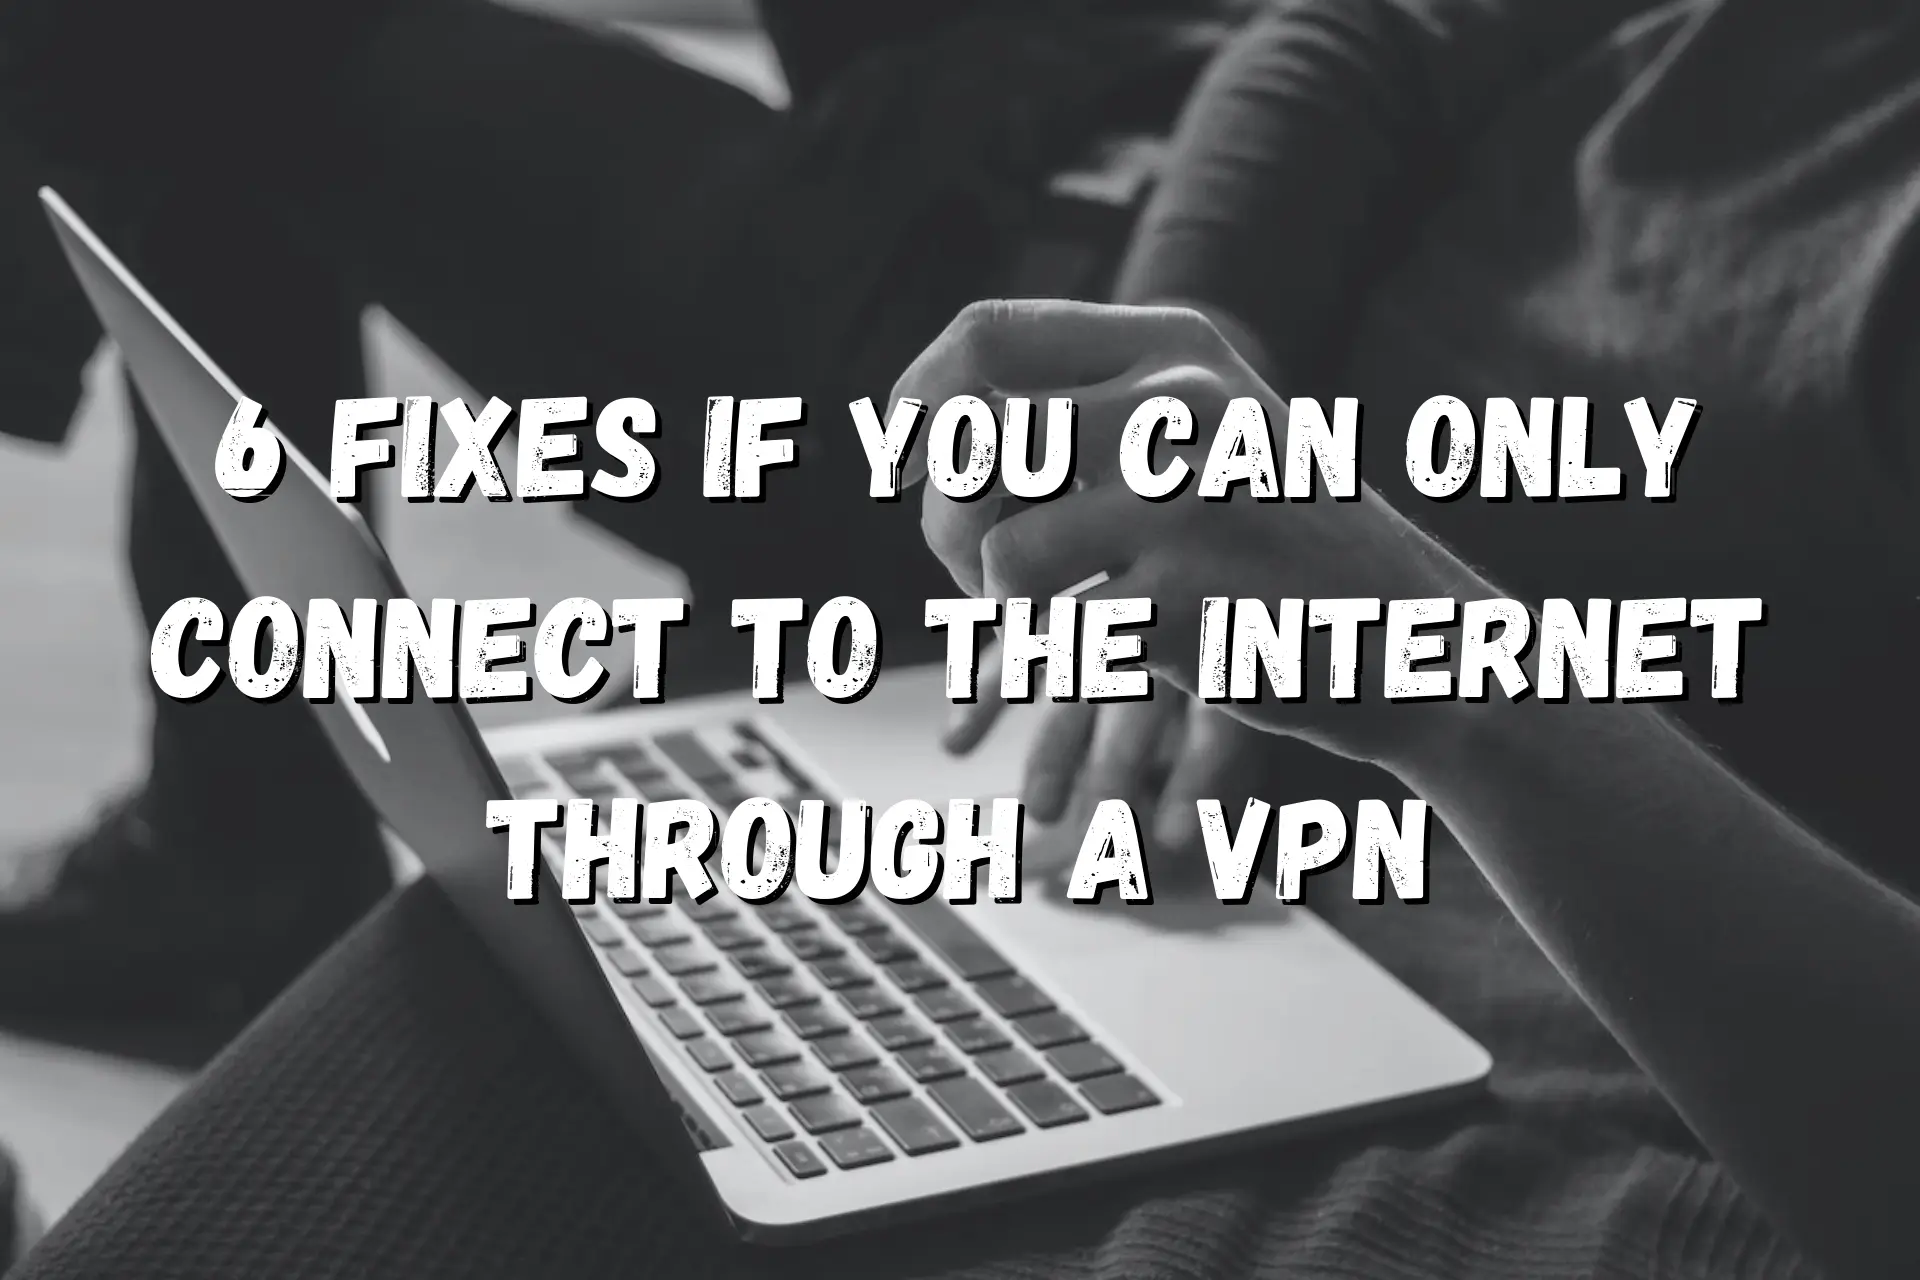 can only connect to internet through vpn